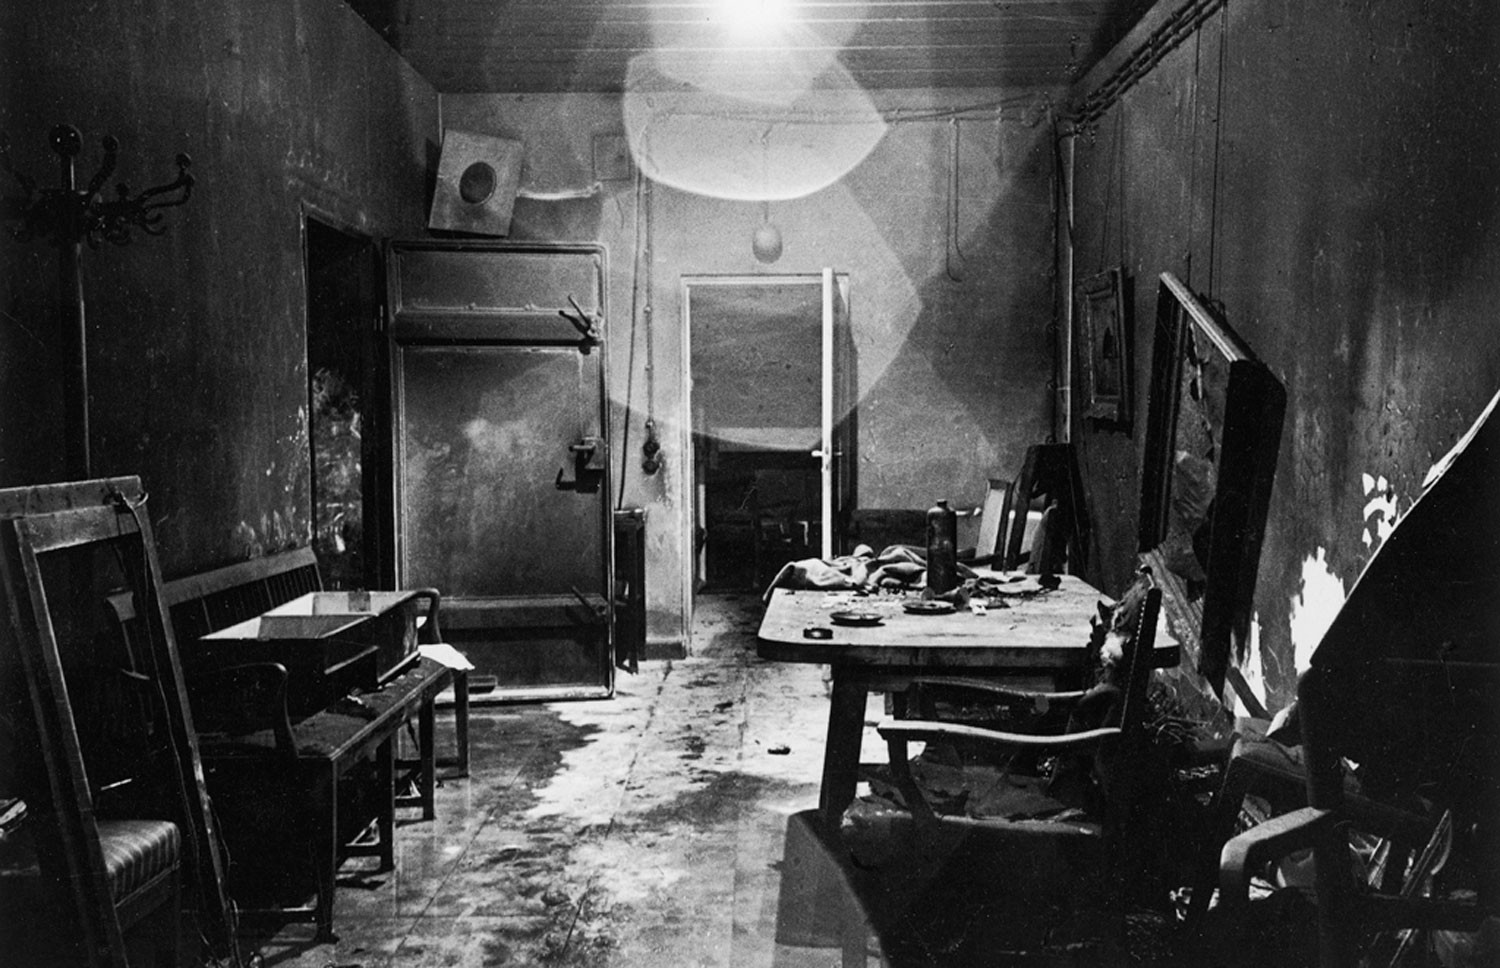 This photo was taken inside Hitlers bunker Fhrerbunker in 1945 by allied soldiers.